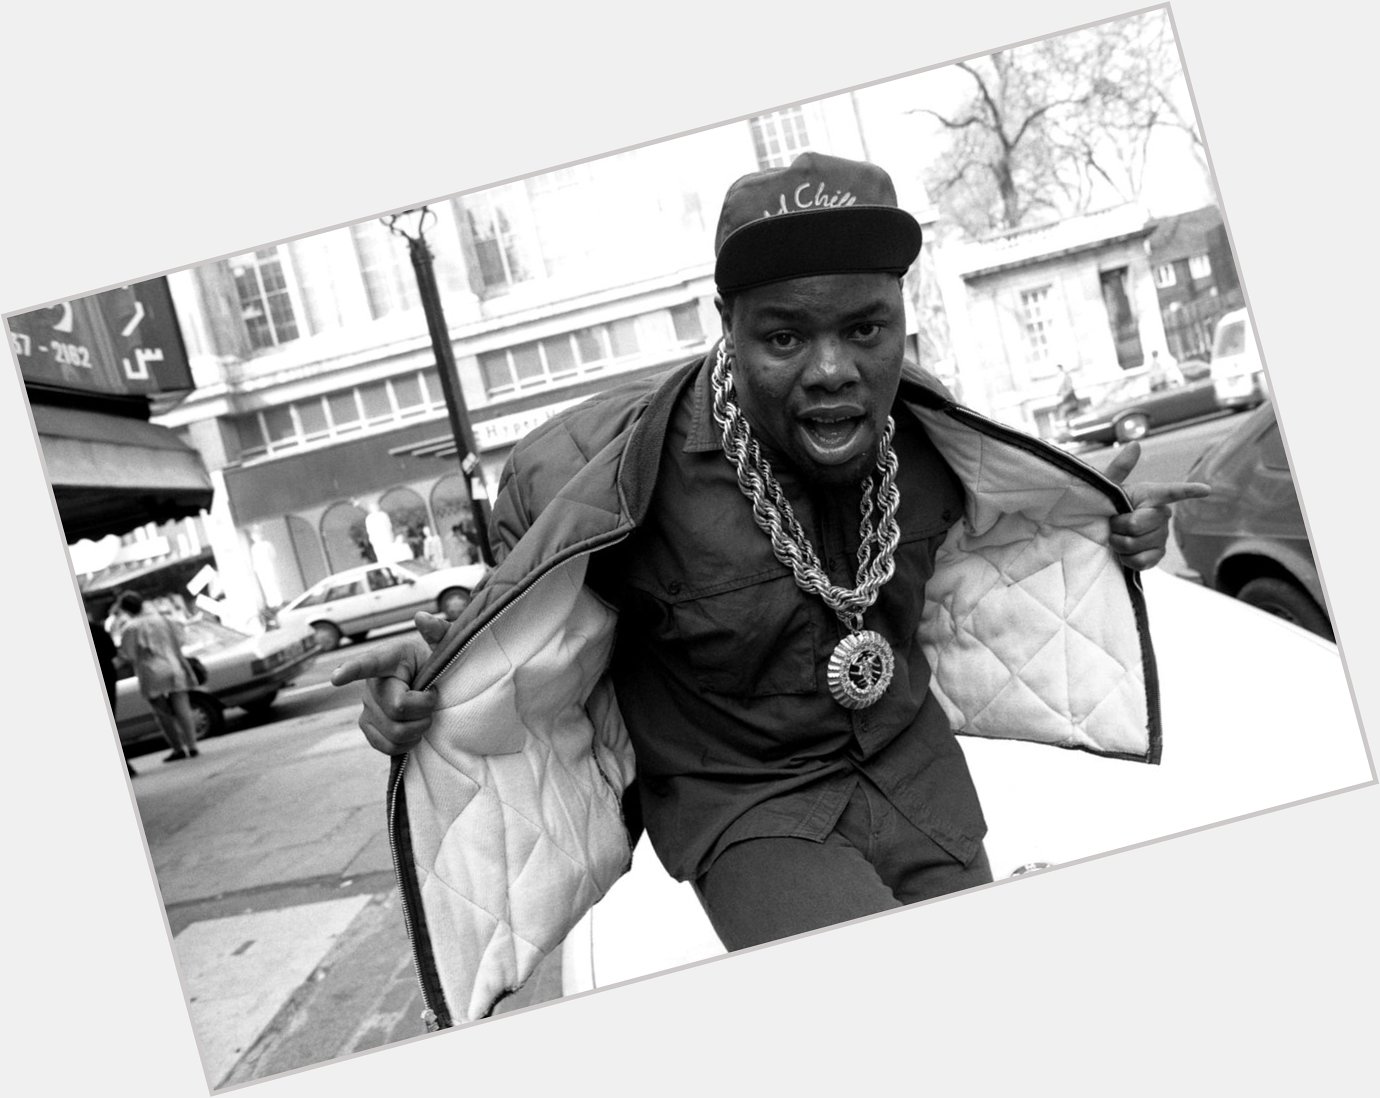 Happy Birthday to the one and only Biz Markie! Nobody will ever